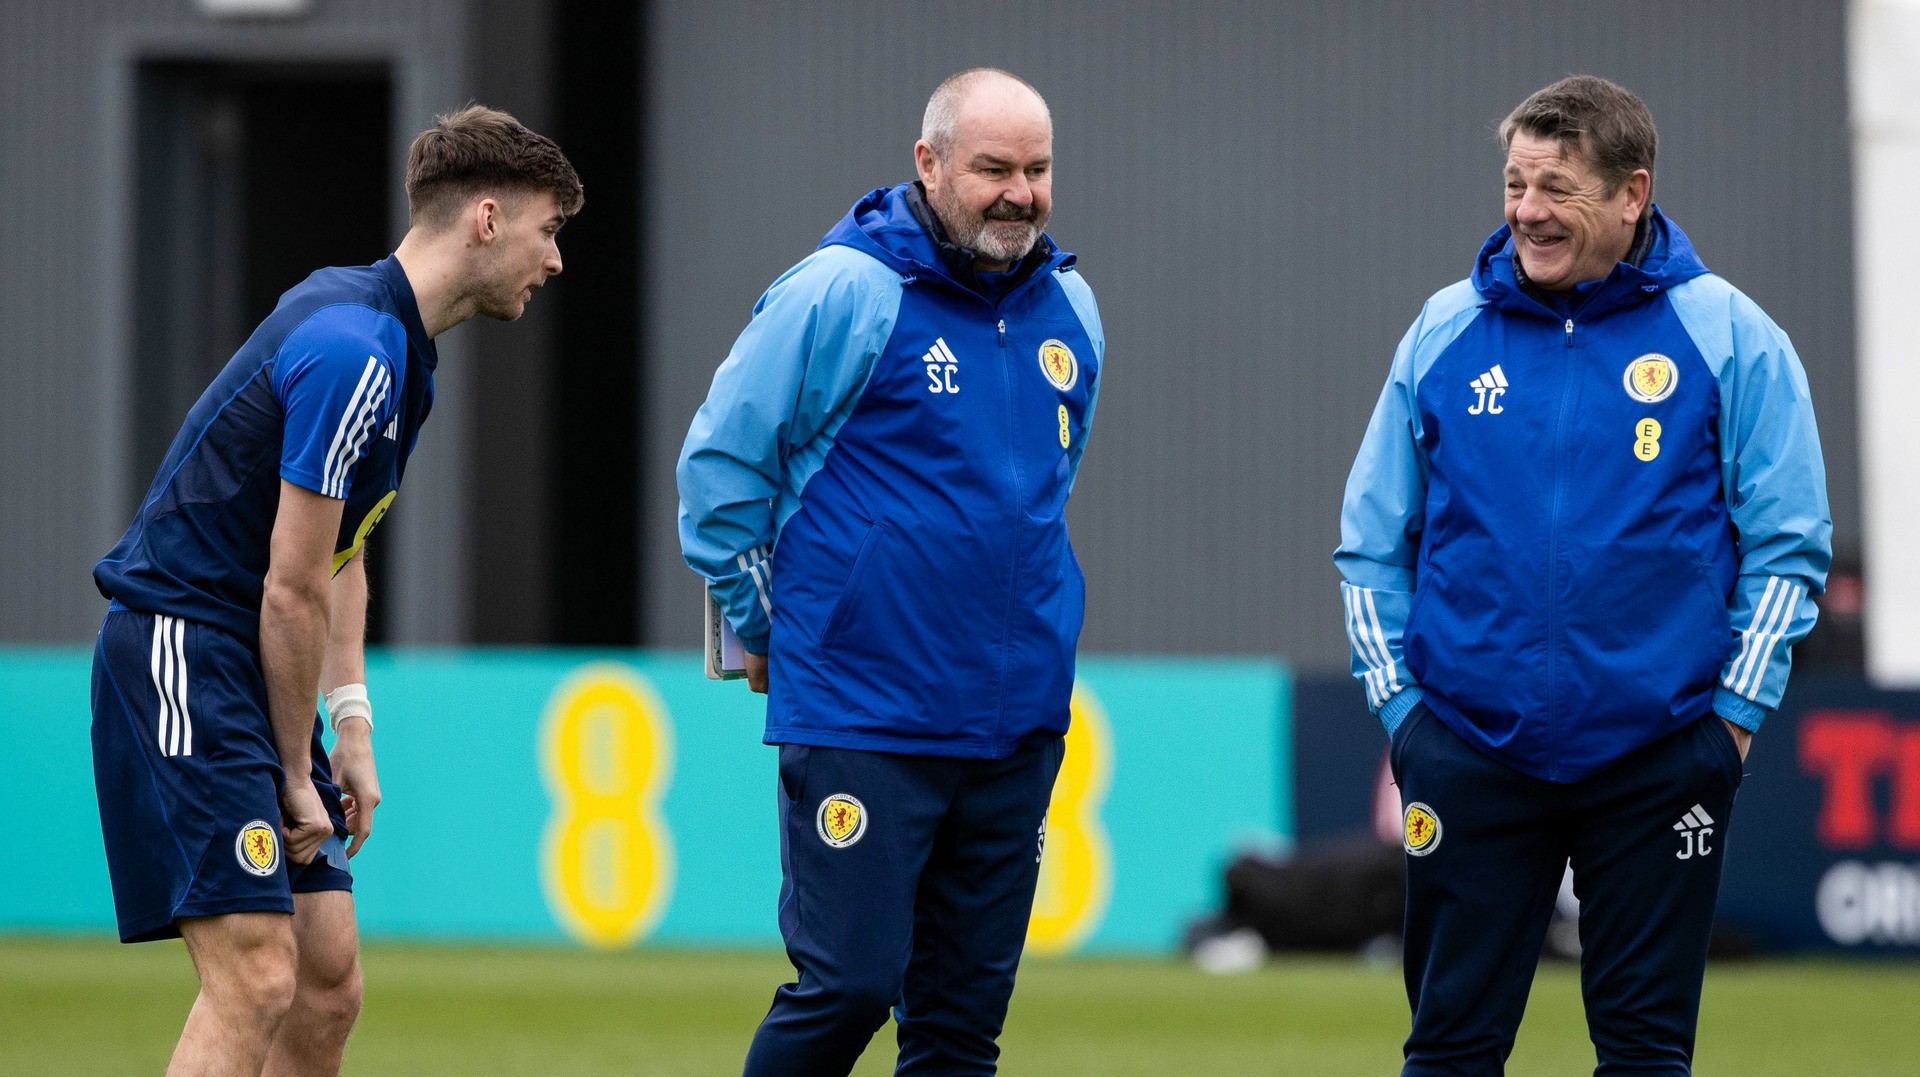 Kieran Tierney, Steve Clarke and John Carver during a Scotland training session at Lesser Hampden. (Photo by Craig Williamson / SNS Group)